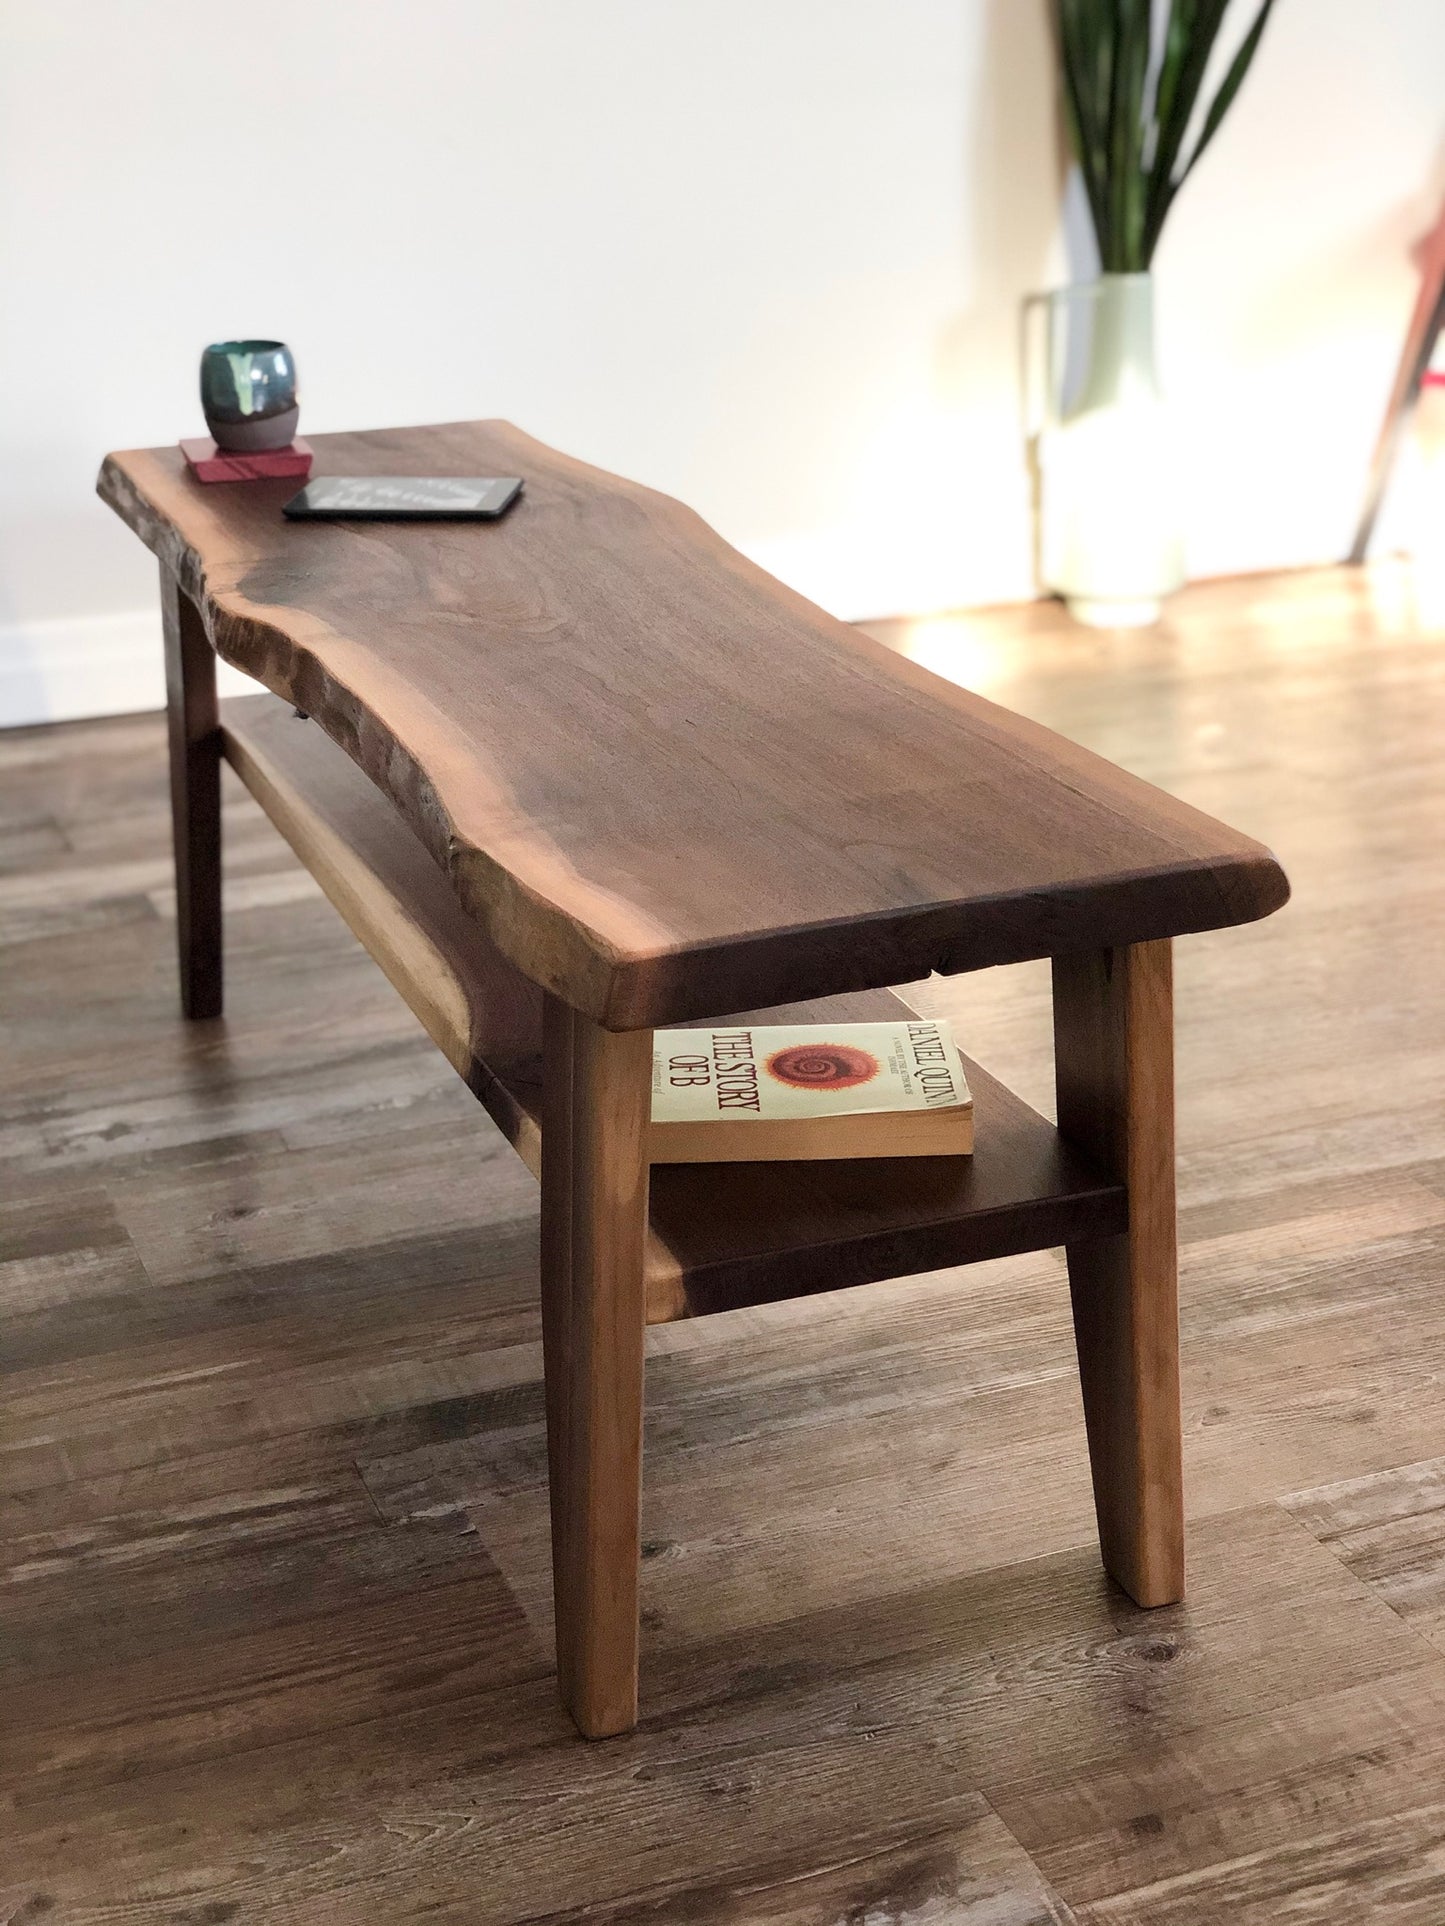 Richvale - Rustic Wood Live Edge Coffee Table